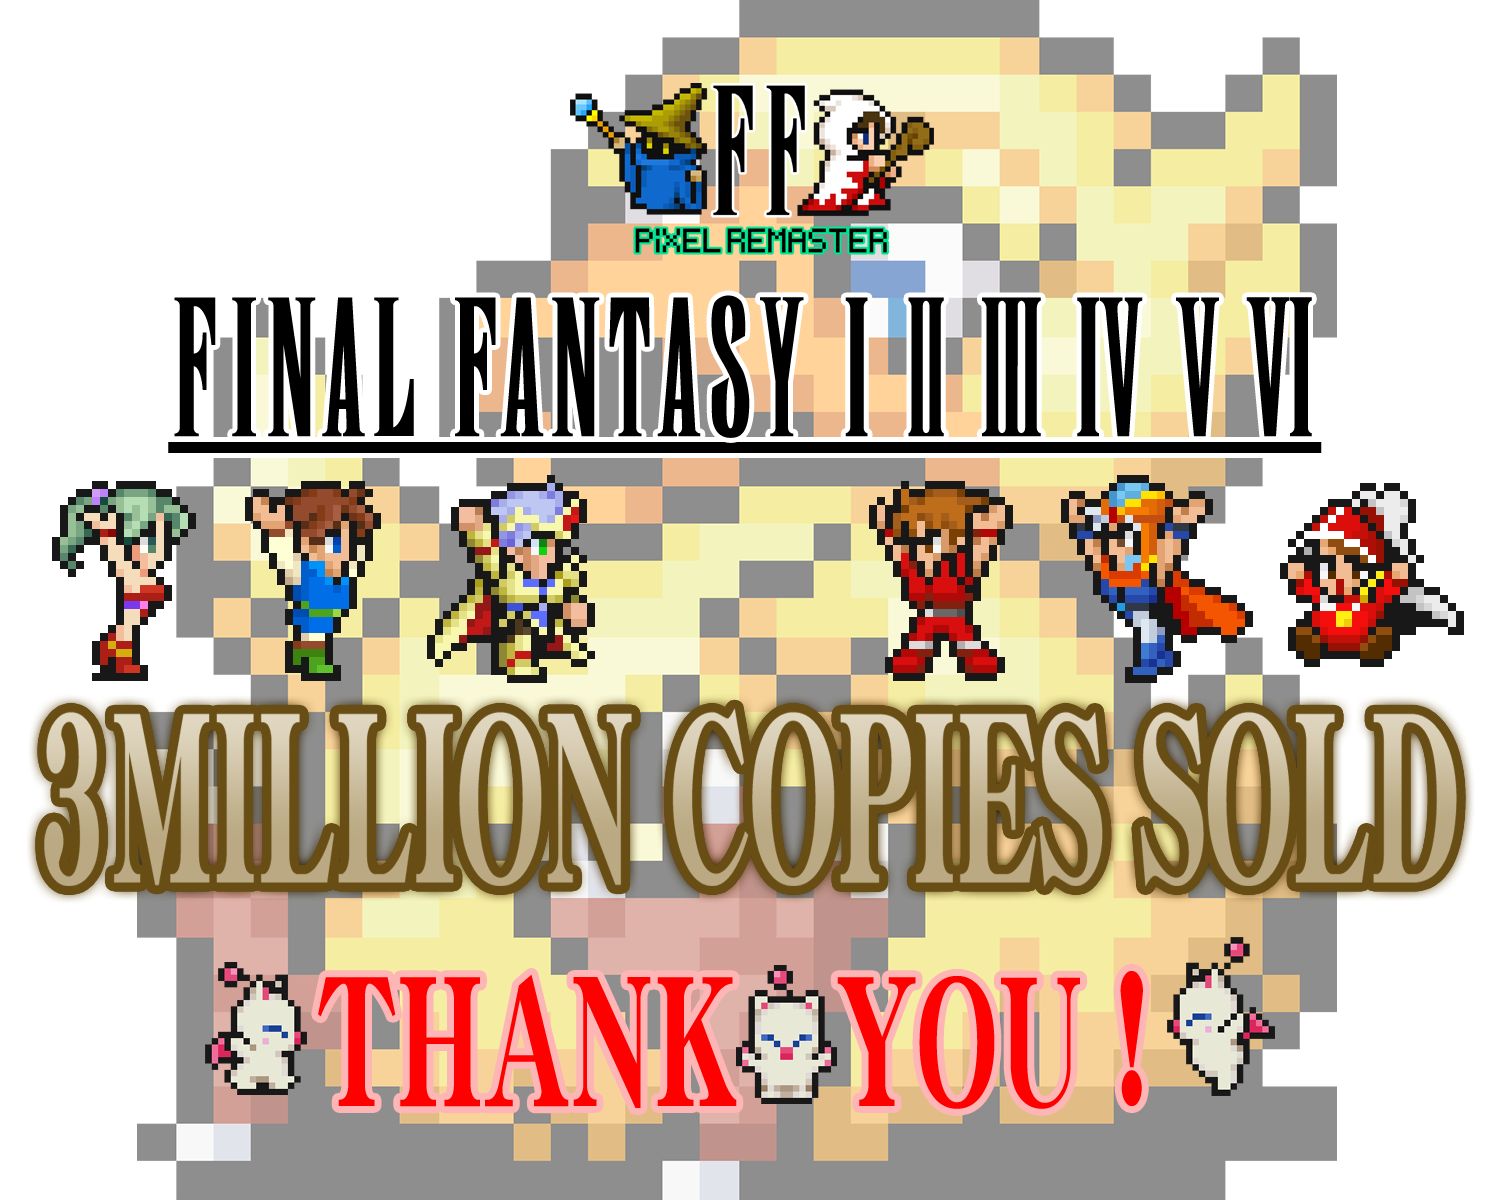 Six works in the FINAL FANTASY PIXEL REMASTER series have sold more than 3 million copies worldwide.